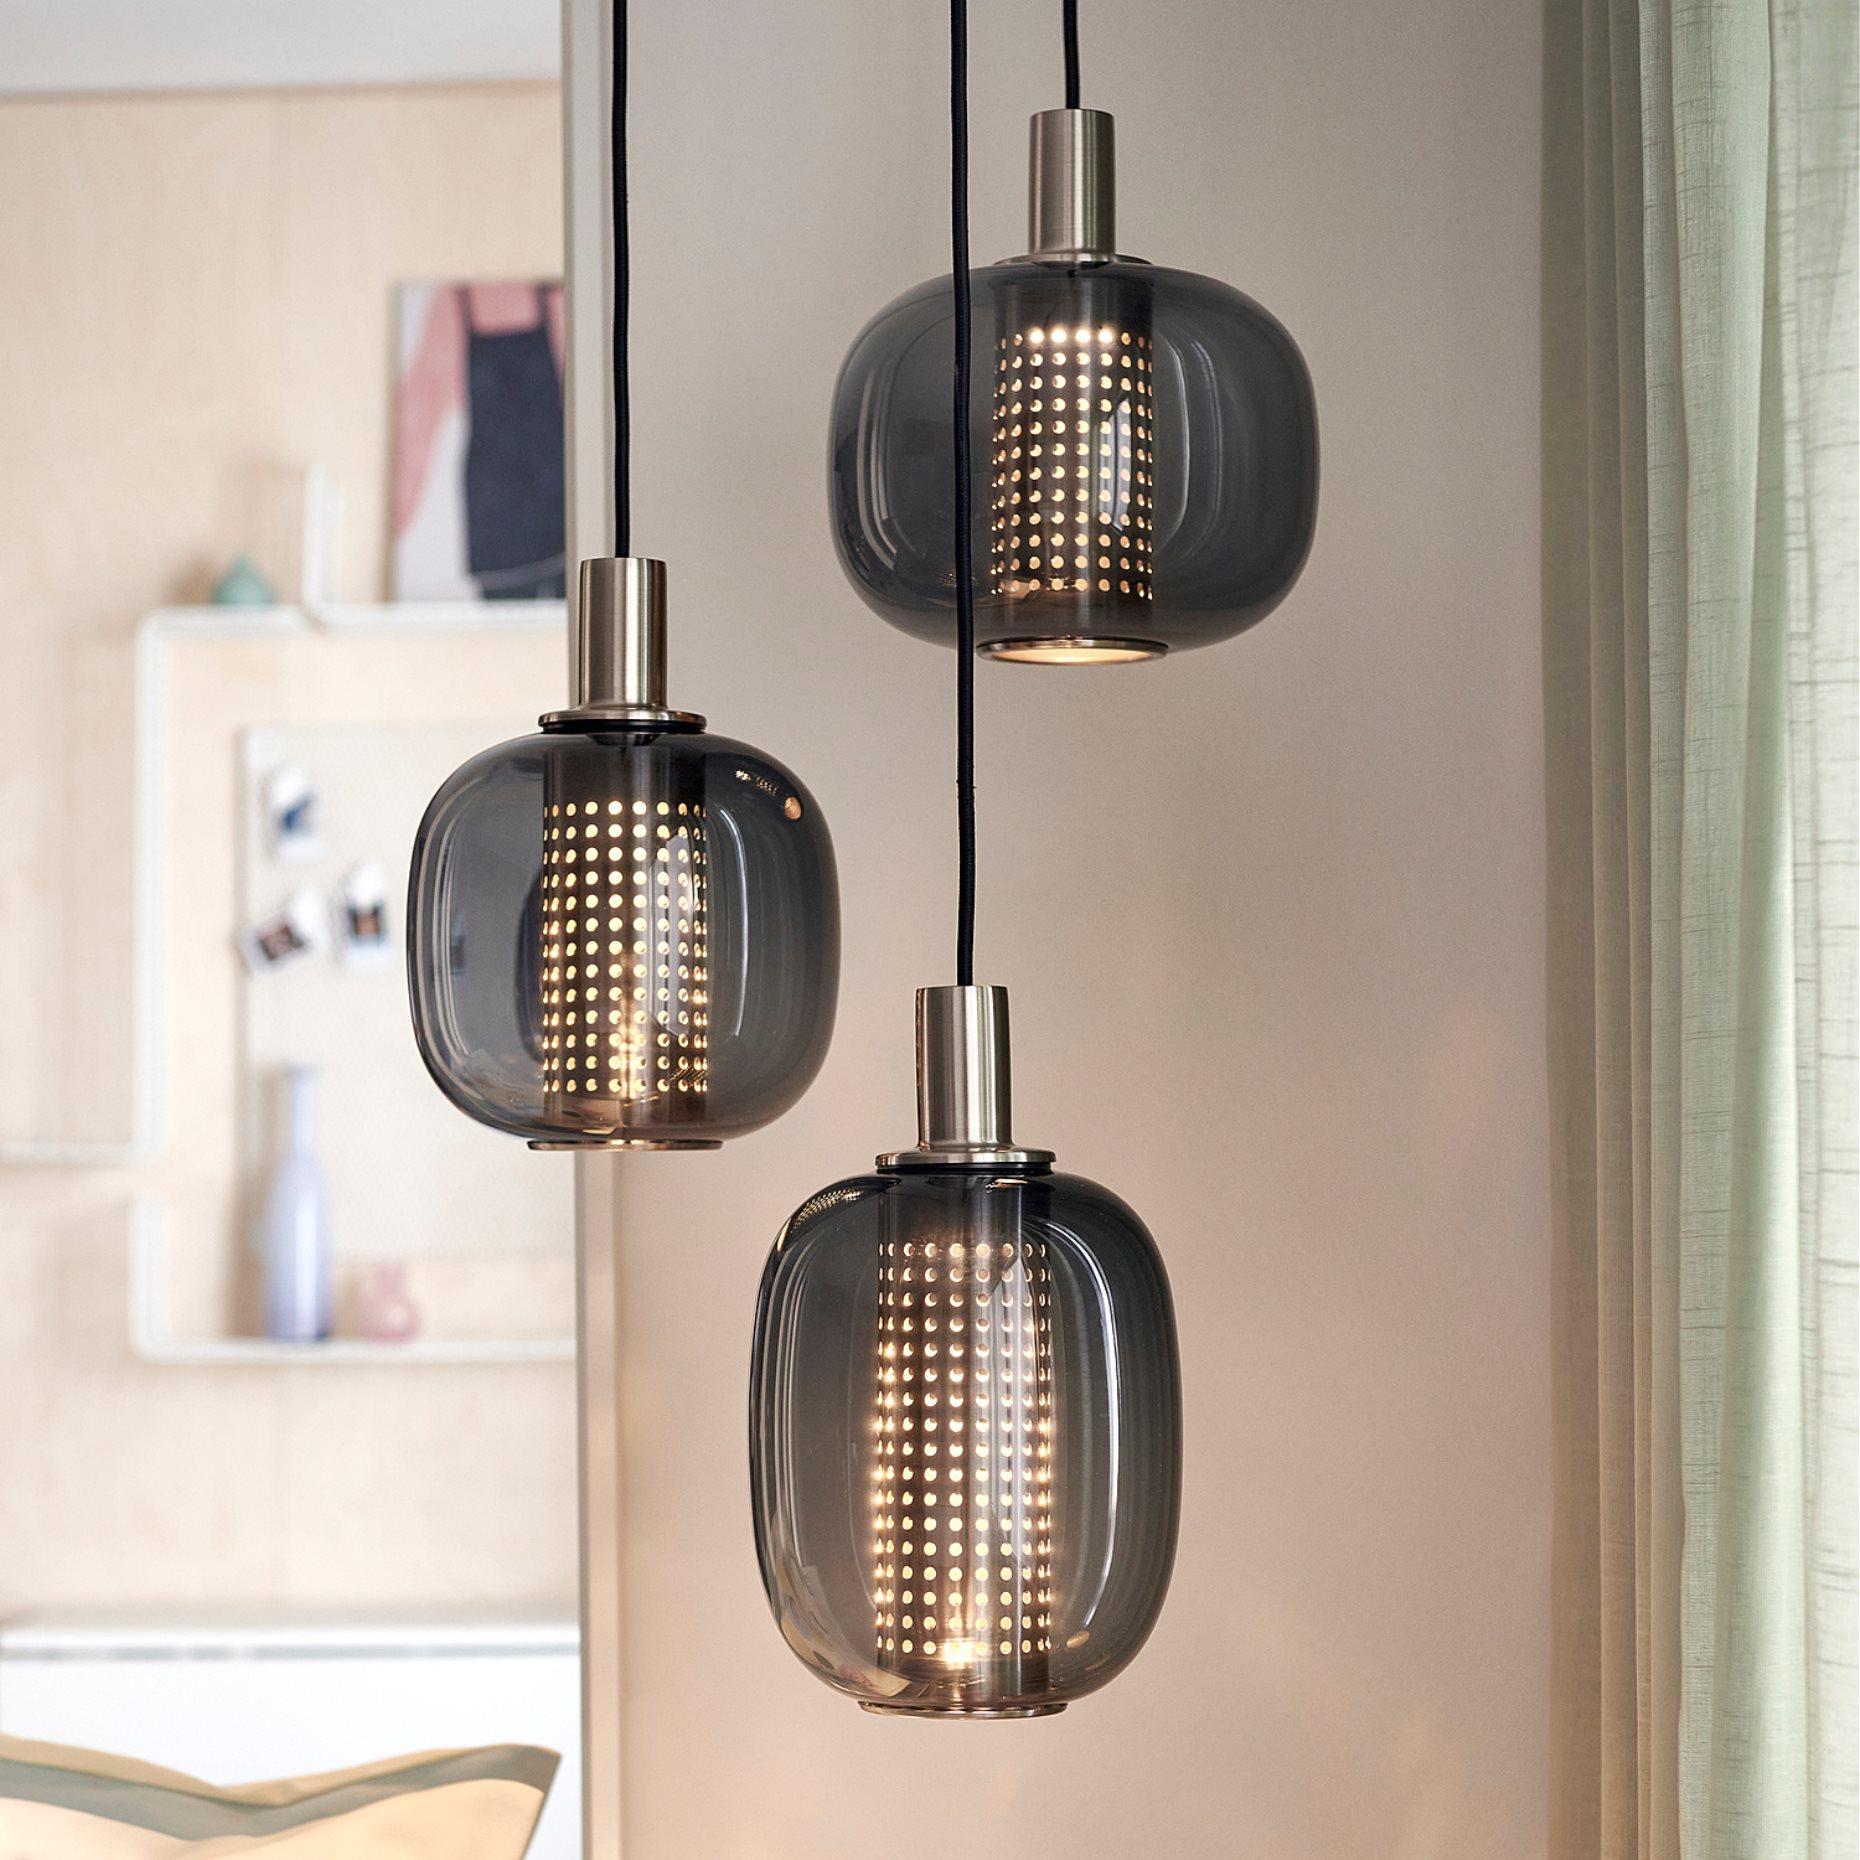 HΟGVIND, pendant lamp with 3 lamps, 504.929.29